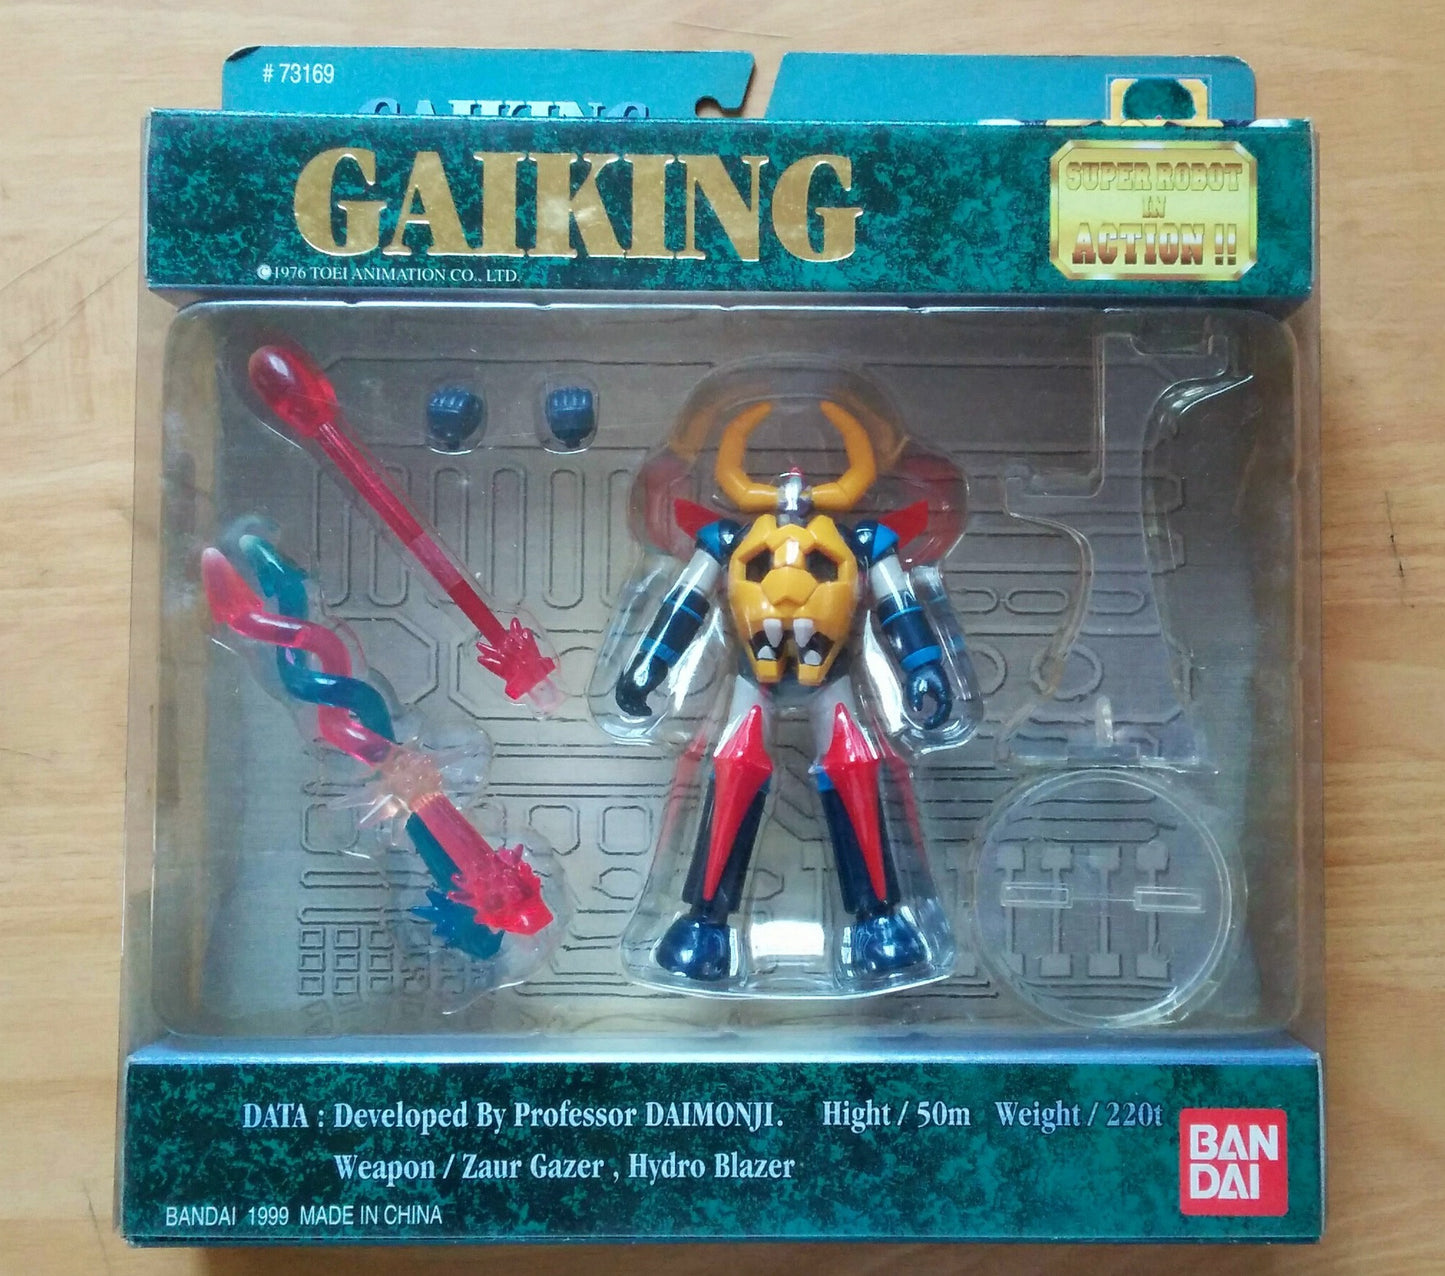 Bandai 1999 Super Robot In Action Gaiking Collection Figure - Lavits Figure
 - 1